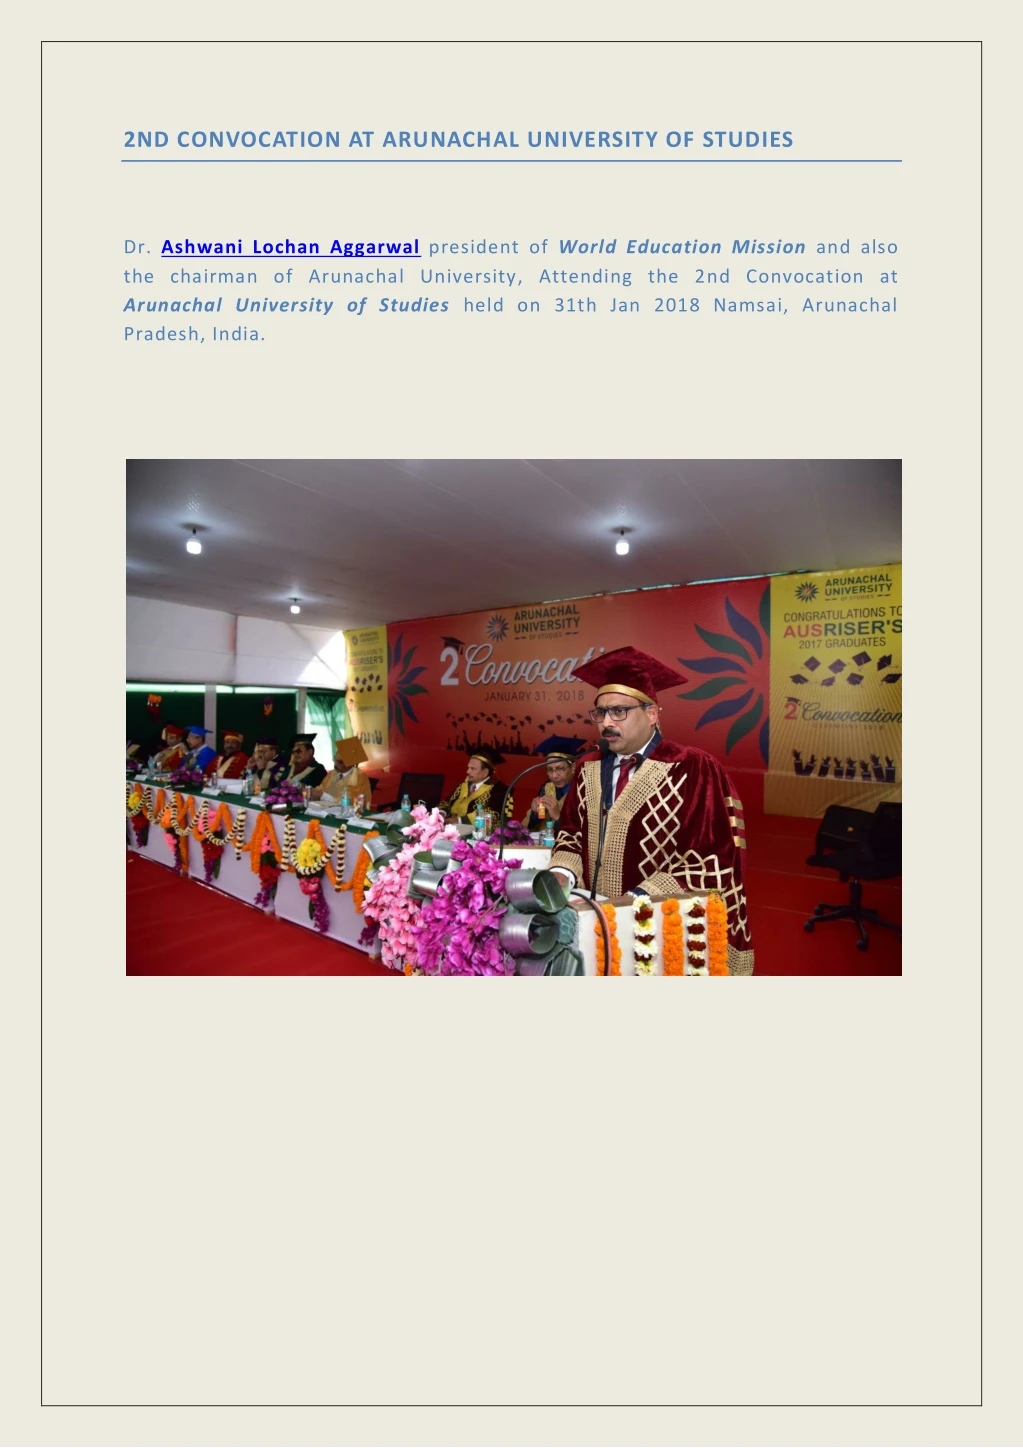 2nd convocation at arunachal university of studies